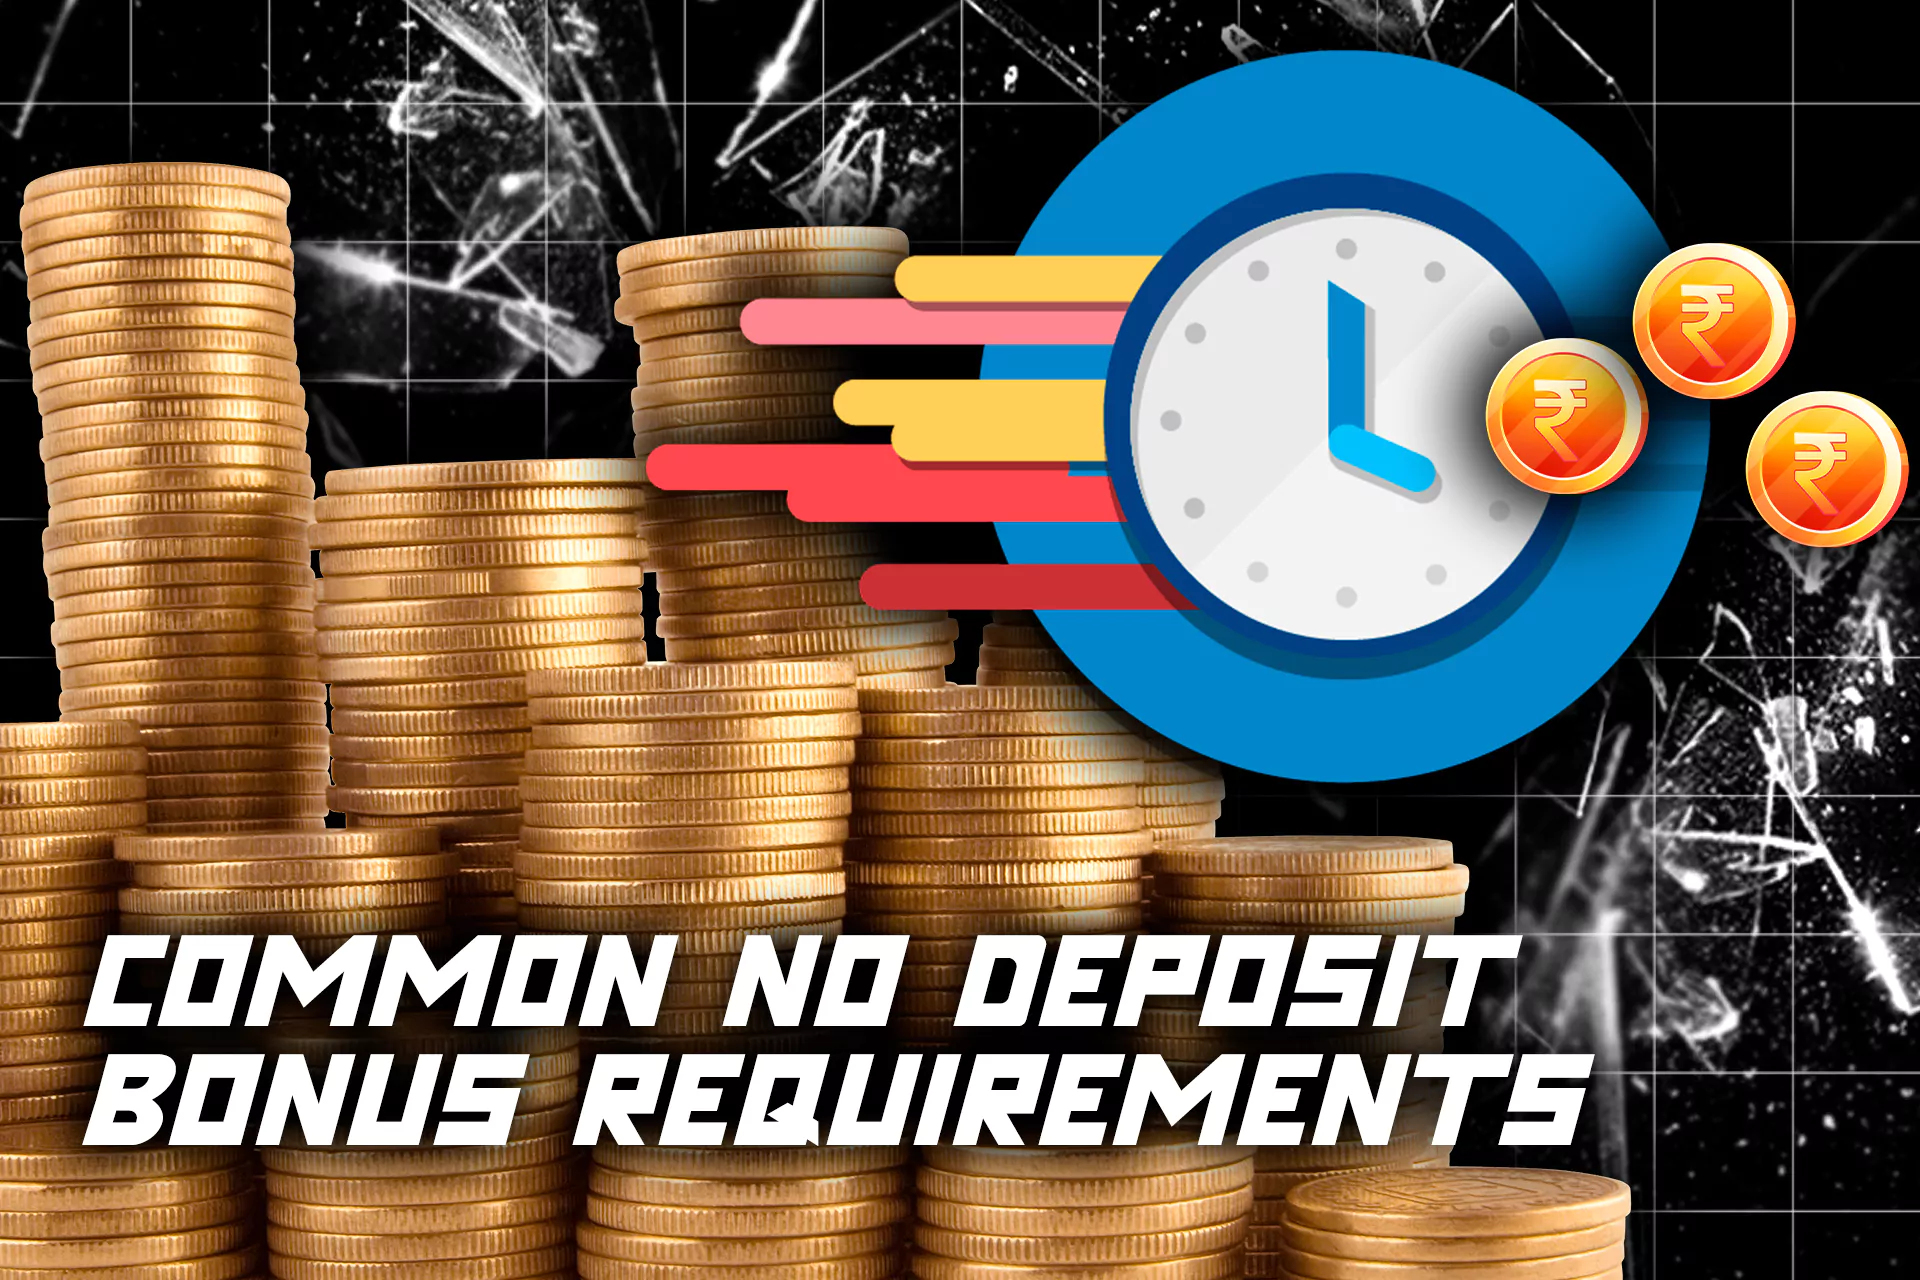 Briefly general requirements for using the no deposit bonus.